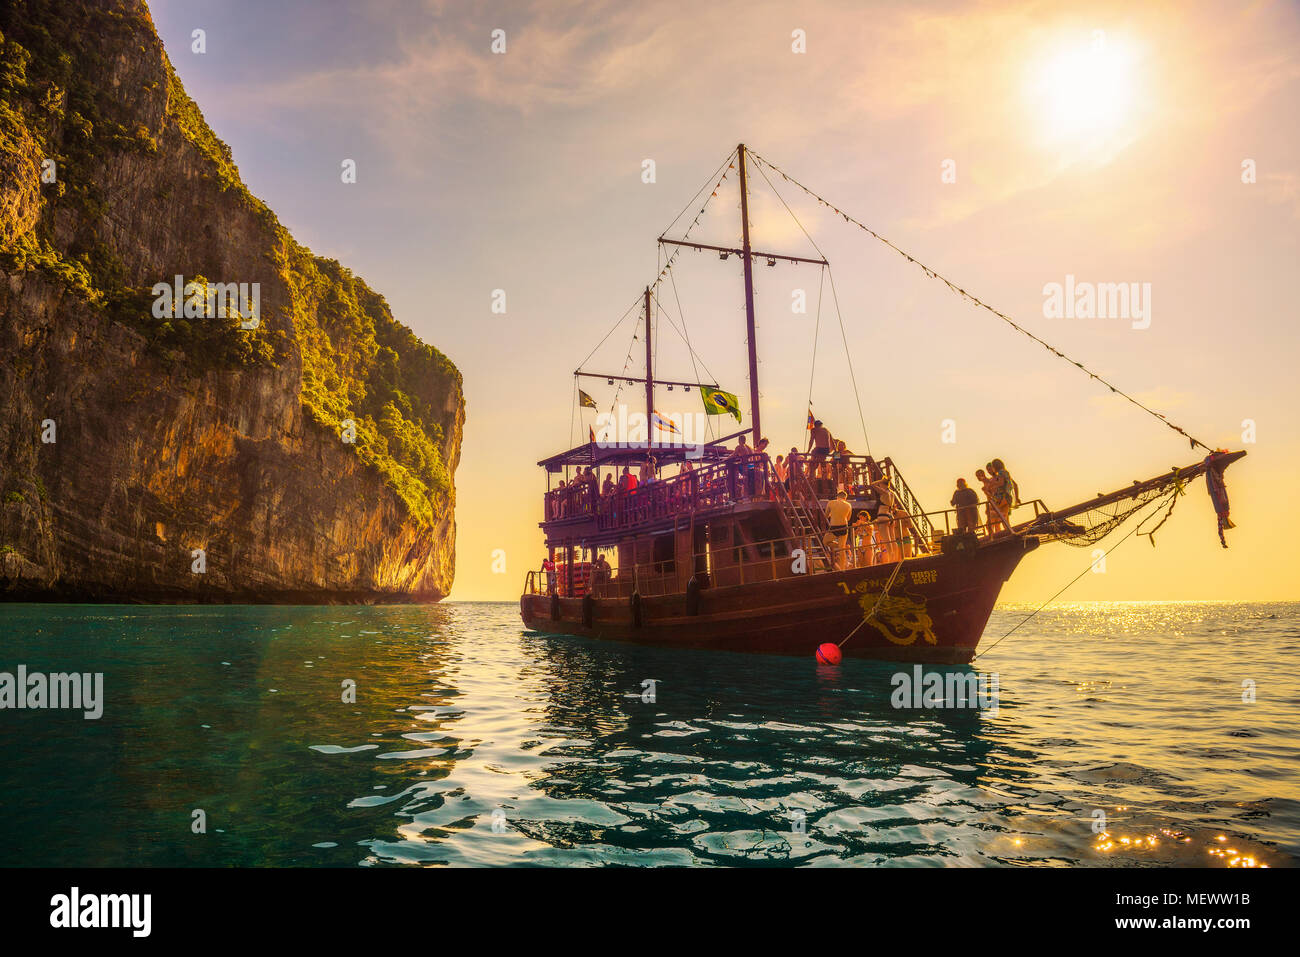 Boat in pirate style with many tourists at Maya Bay in Thailand Stock Photo